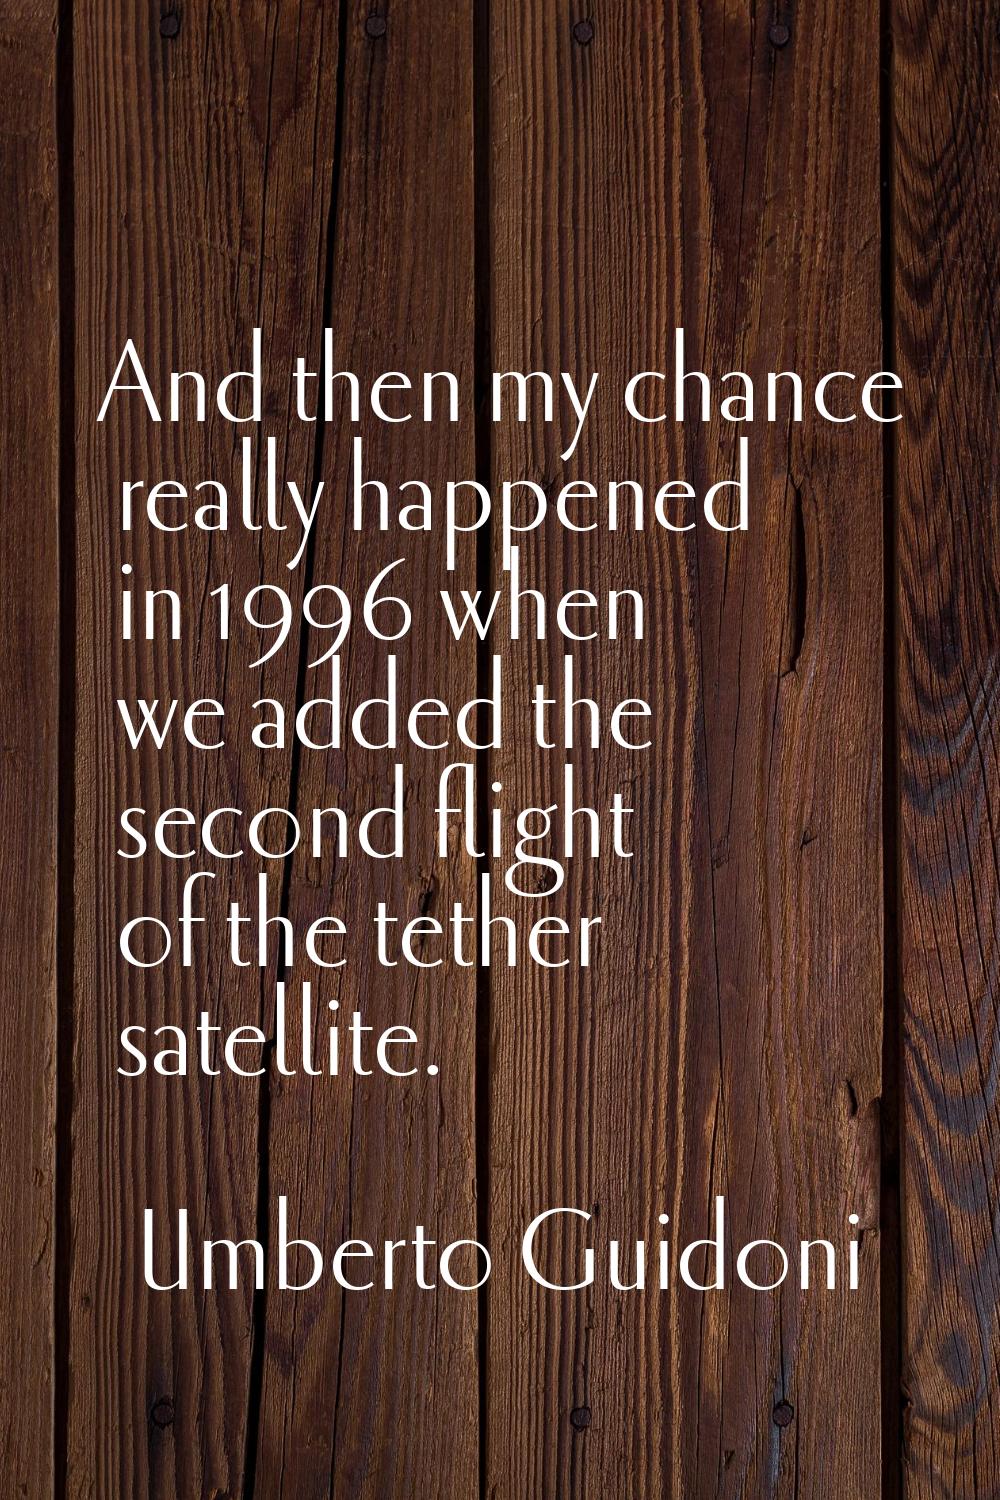 And then my chance really happened in 1996 when we added the second flight of the tether satellite.